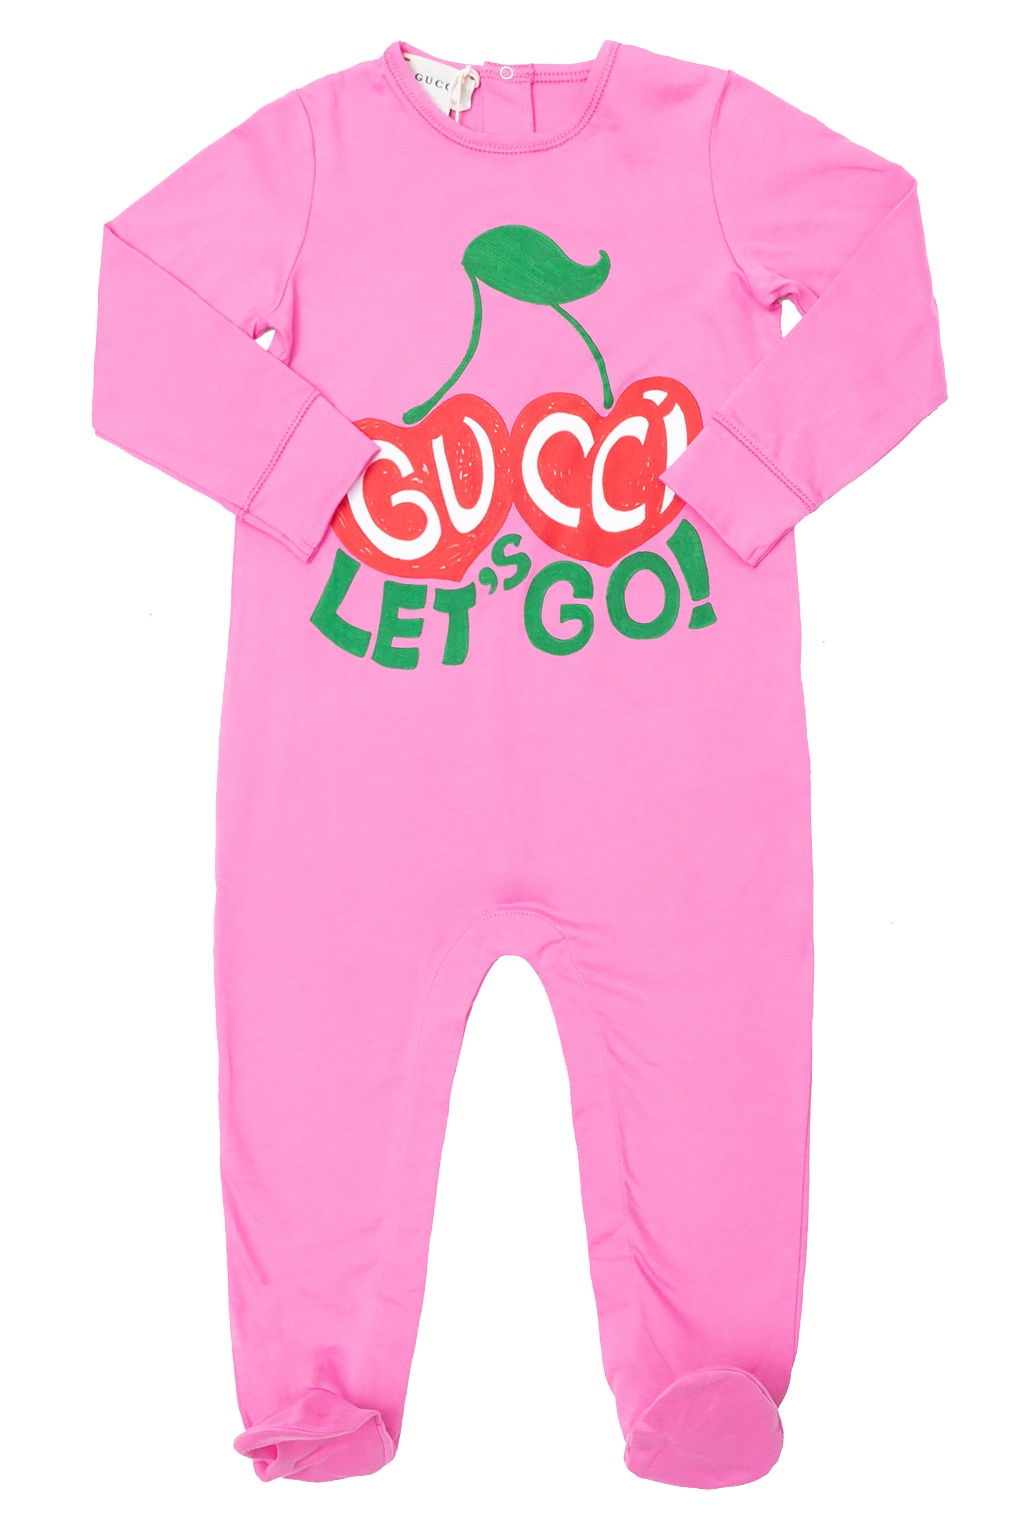 gucci baby suit